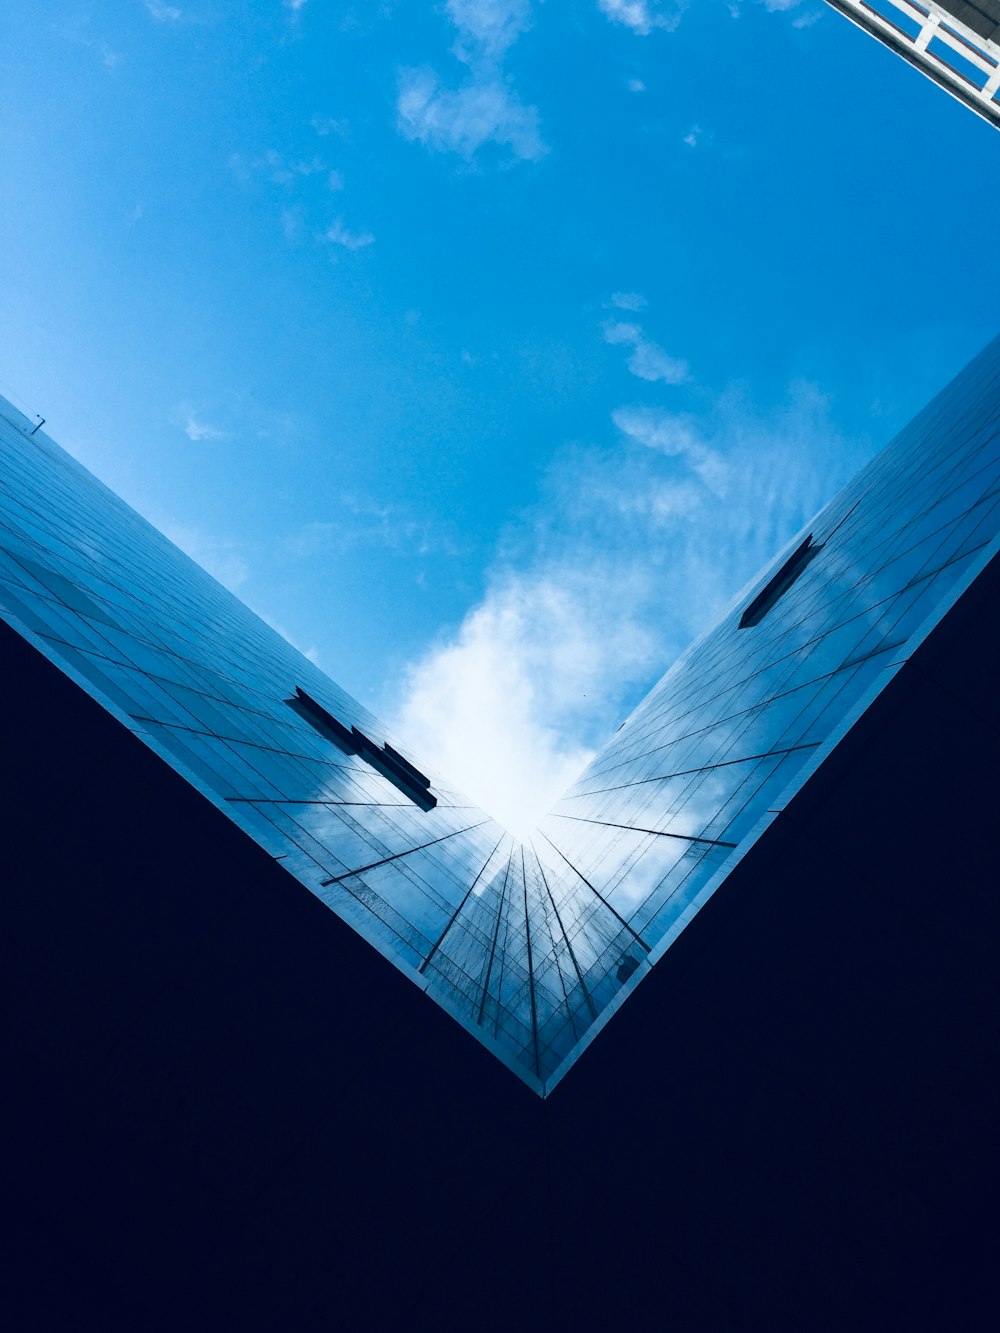 low-angle photography of blue glass walled high-rise building under blue and white skies